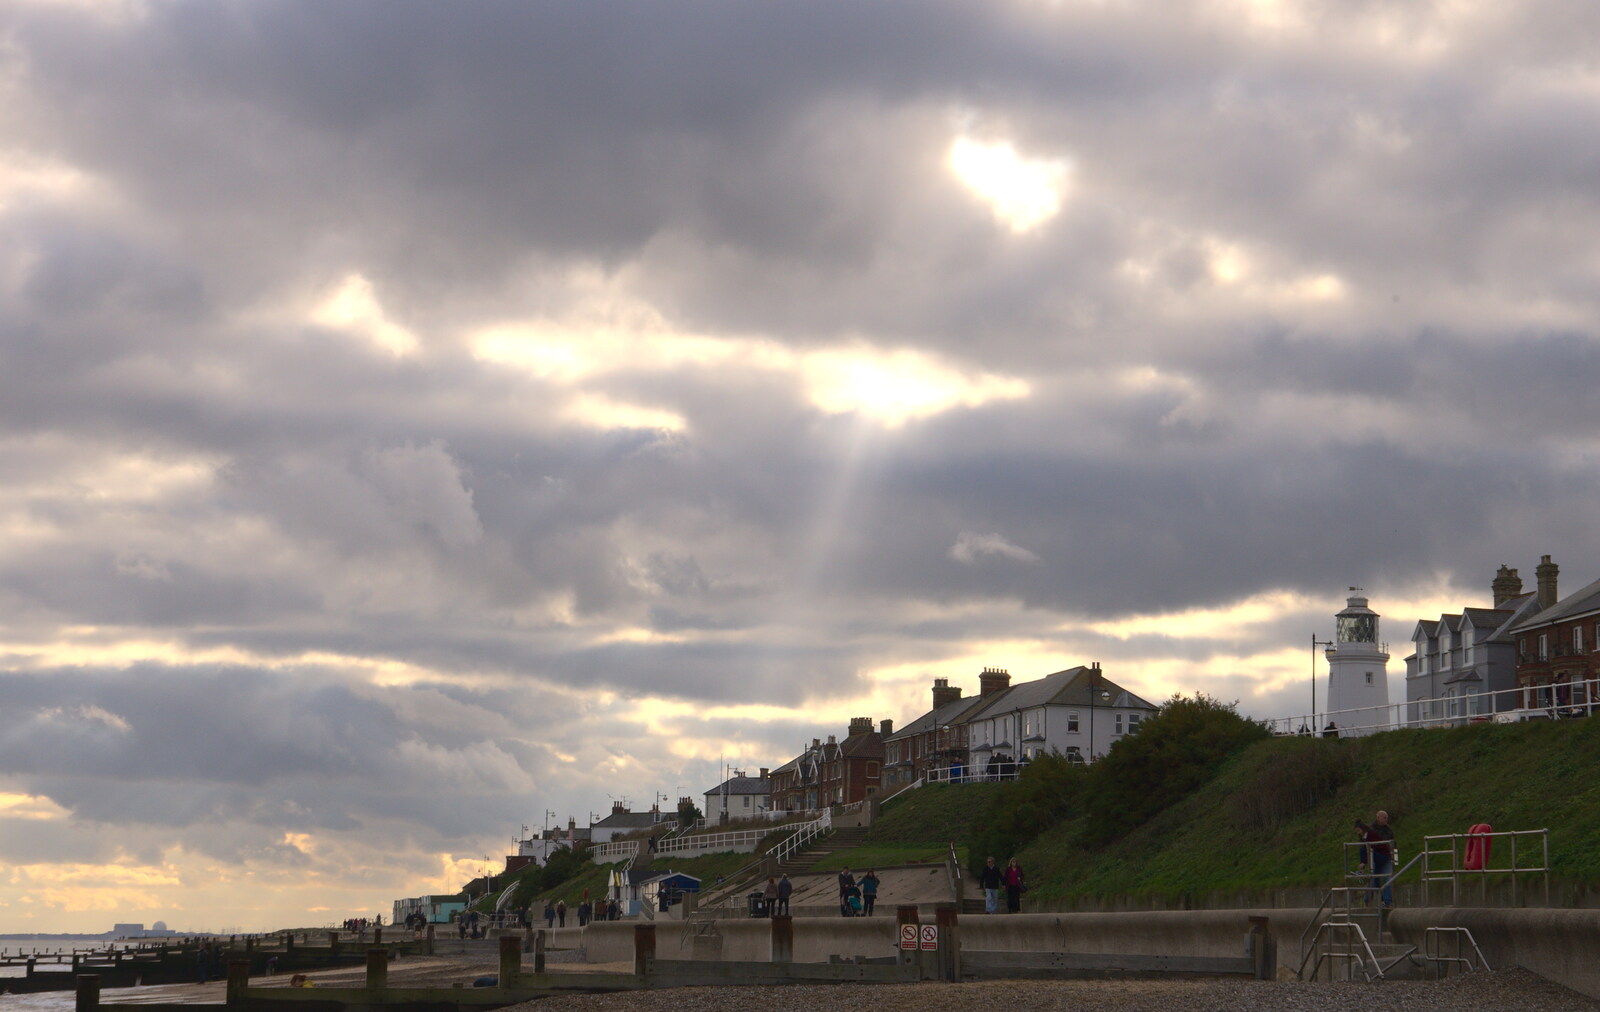 Crepuscular rays light up Southwold from A Trip to the Amusements, Southwold Pier, Southwold, Suffolk - 5th November 2017